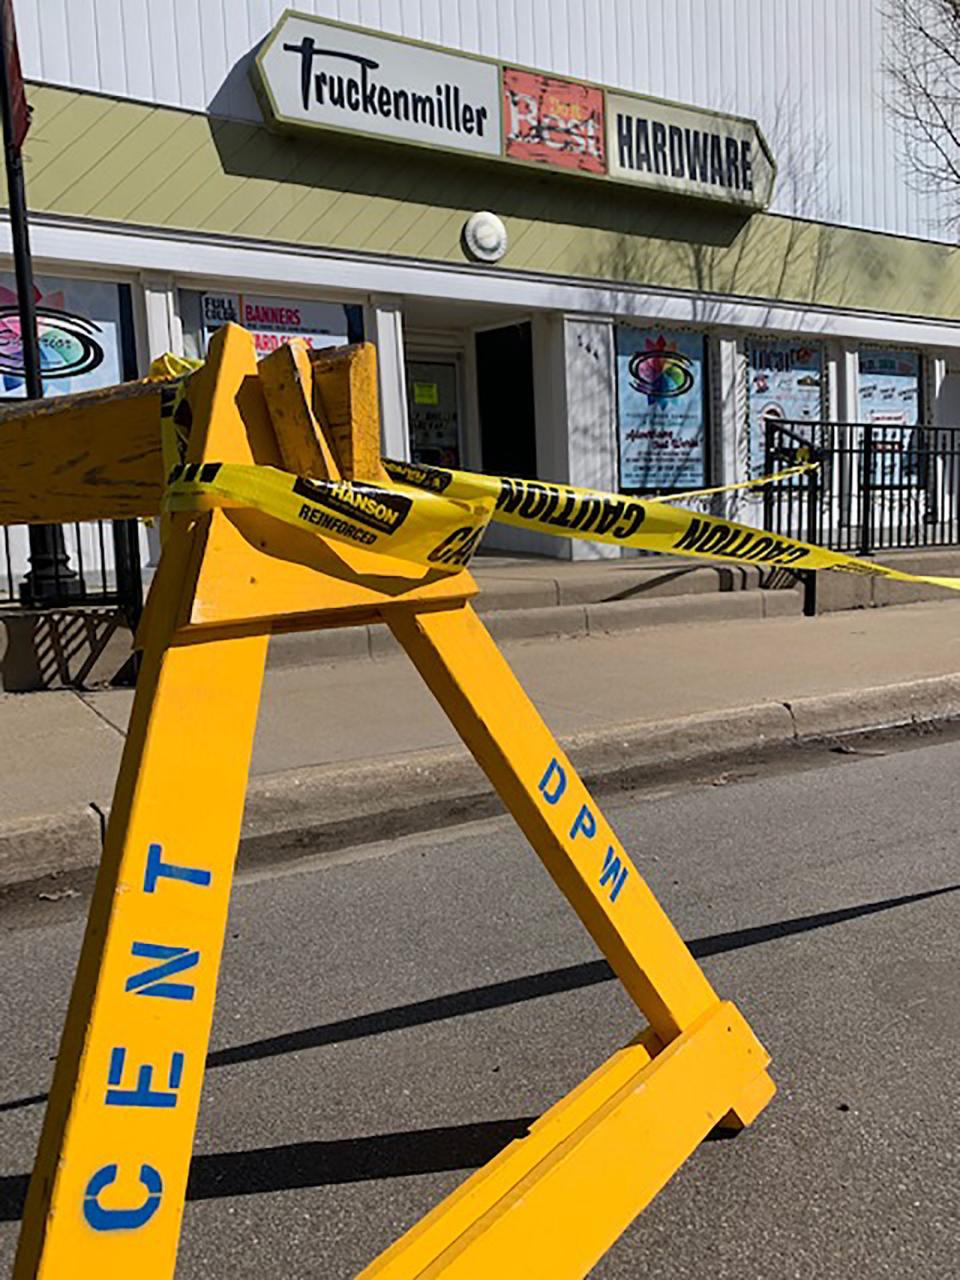 The sidewalk in front of the former Truckenmiller Hardware building in downtown Centreville was blocked off for a while last month after exterior portions of the building detached and fell. Village officials are optimistic the current owner can secure a buyer to fix up the property.